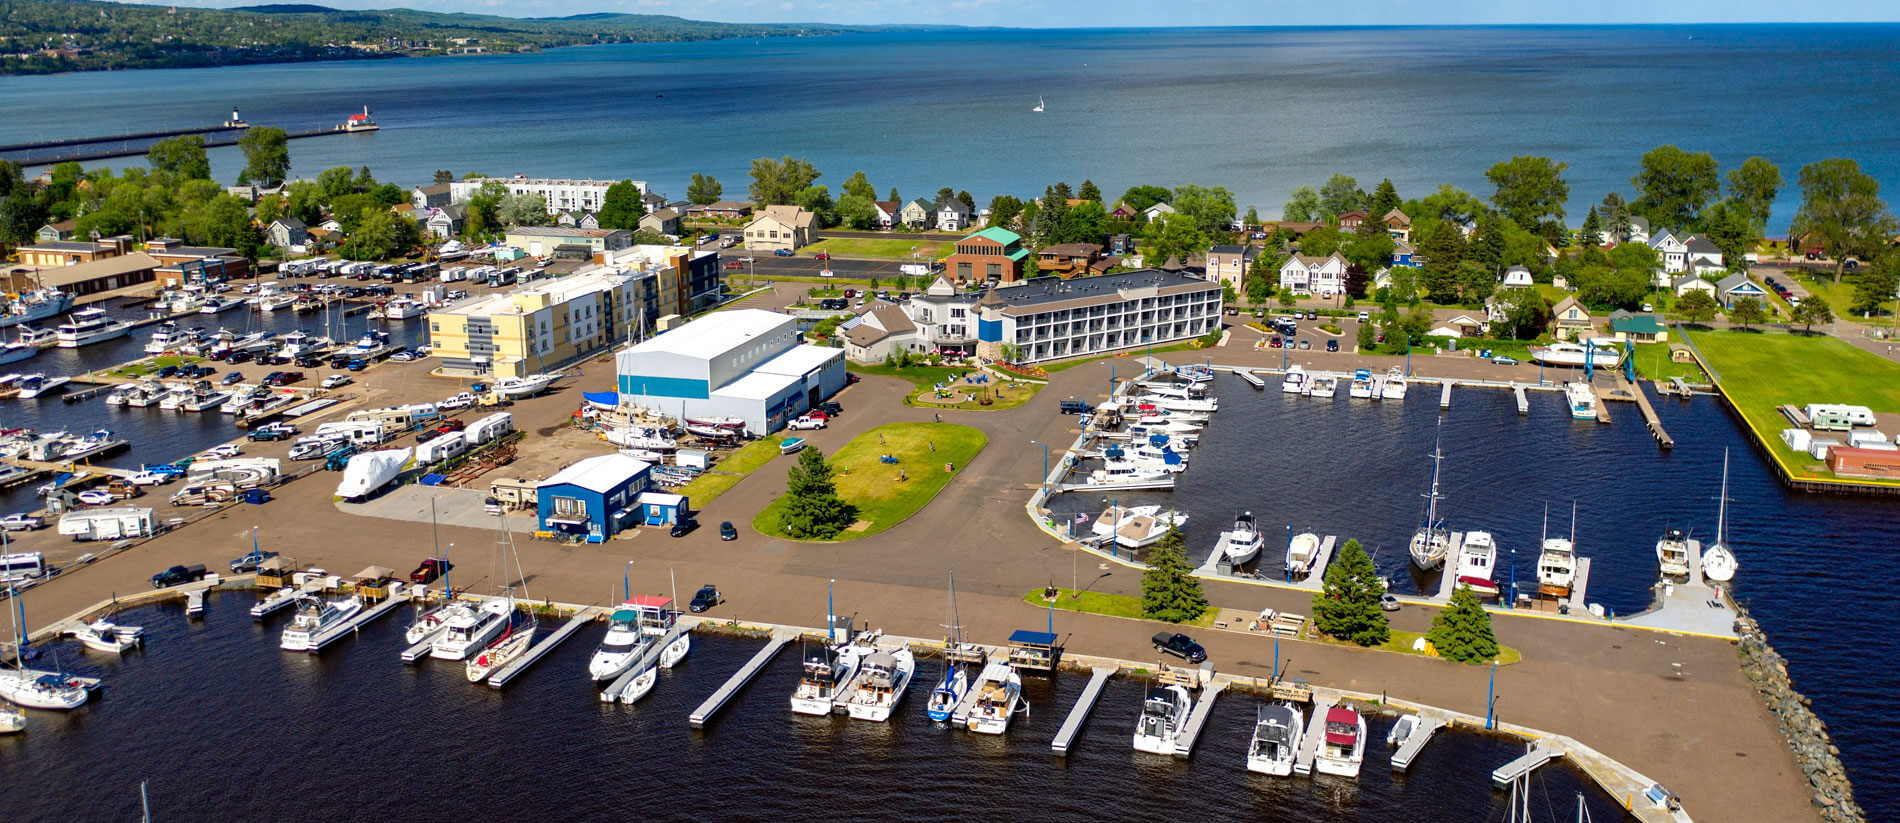 the overlook of Park Point Marina Inn and its shore full of pleasure boats taking from the sky